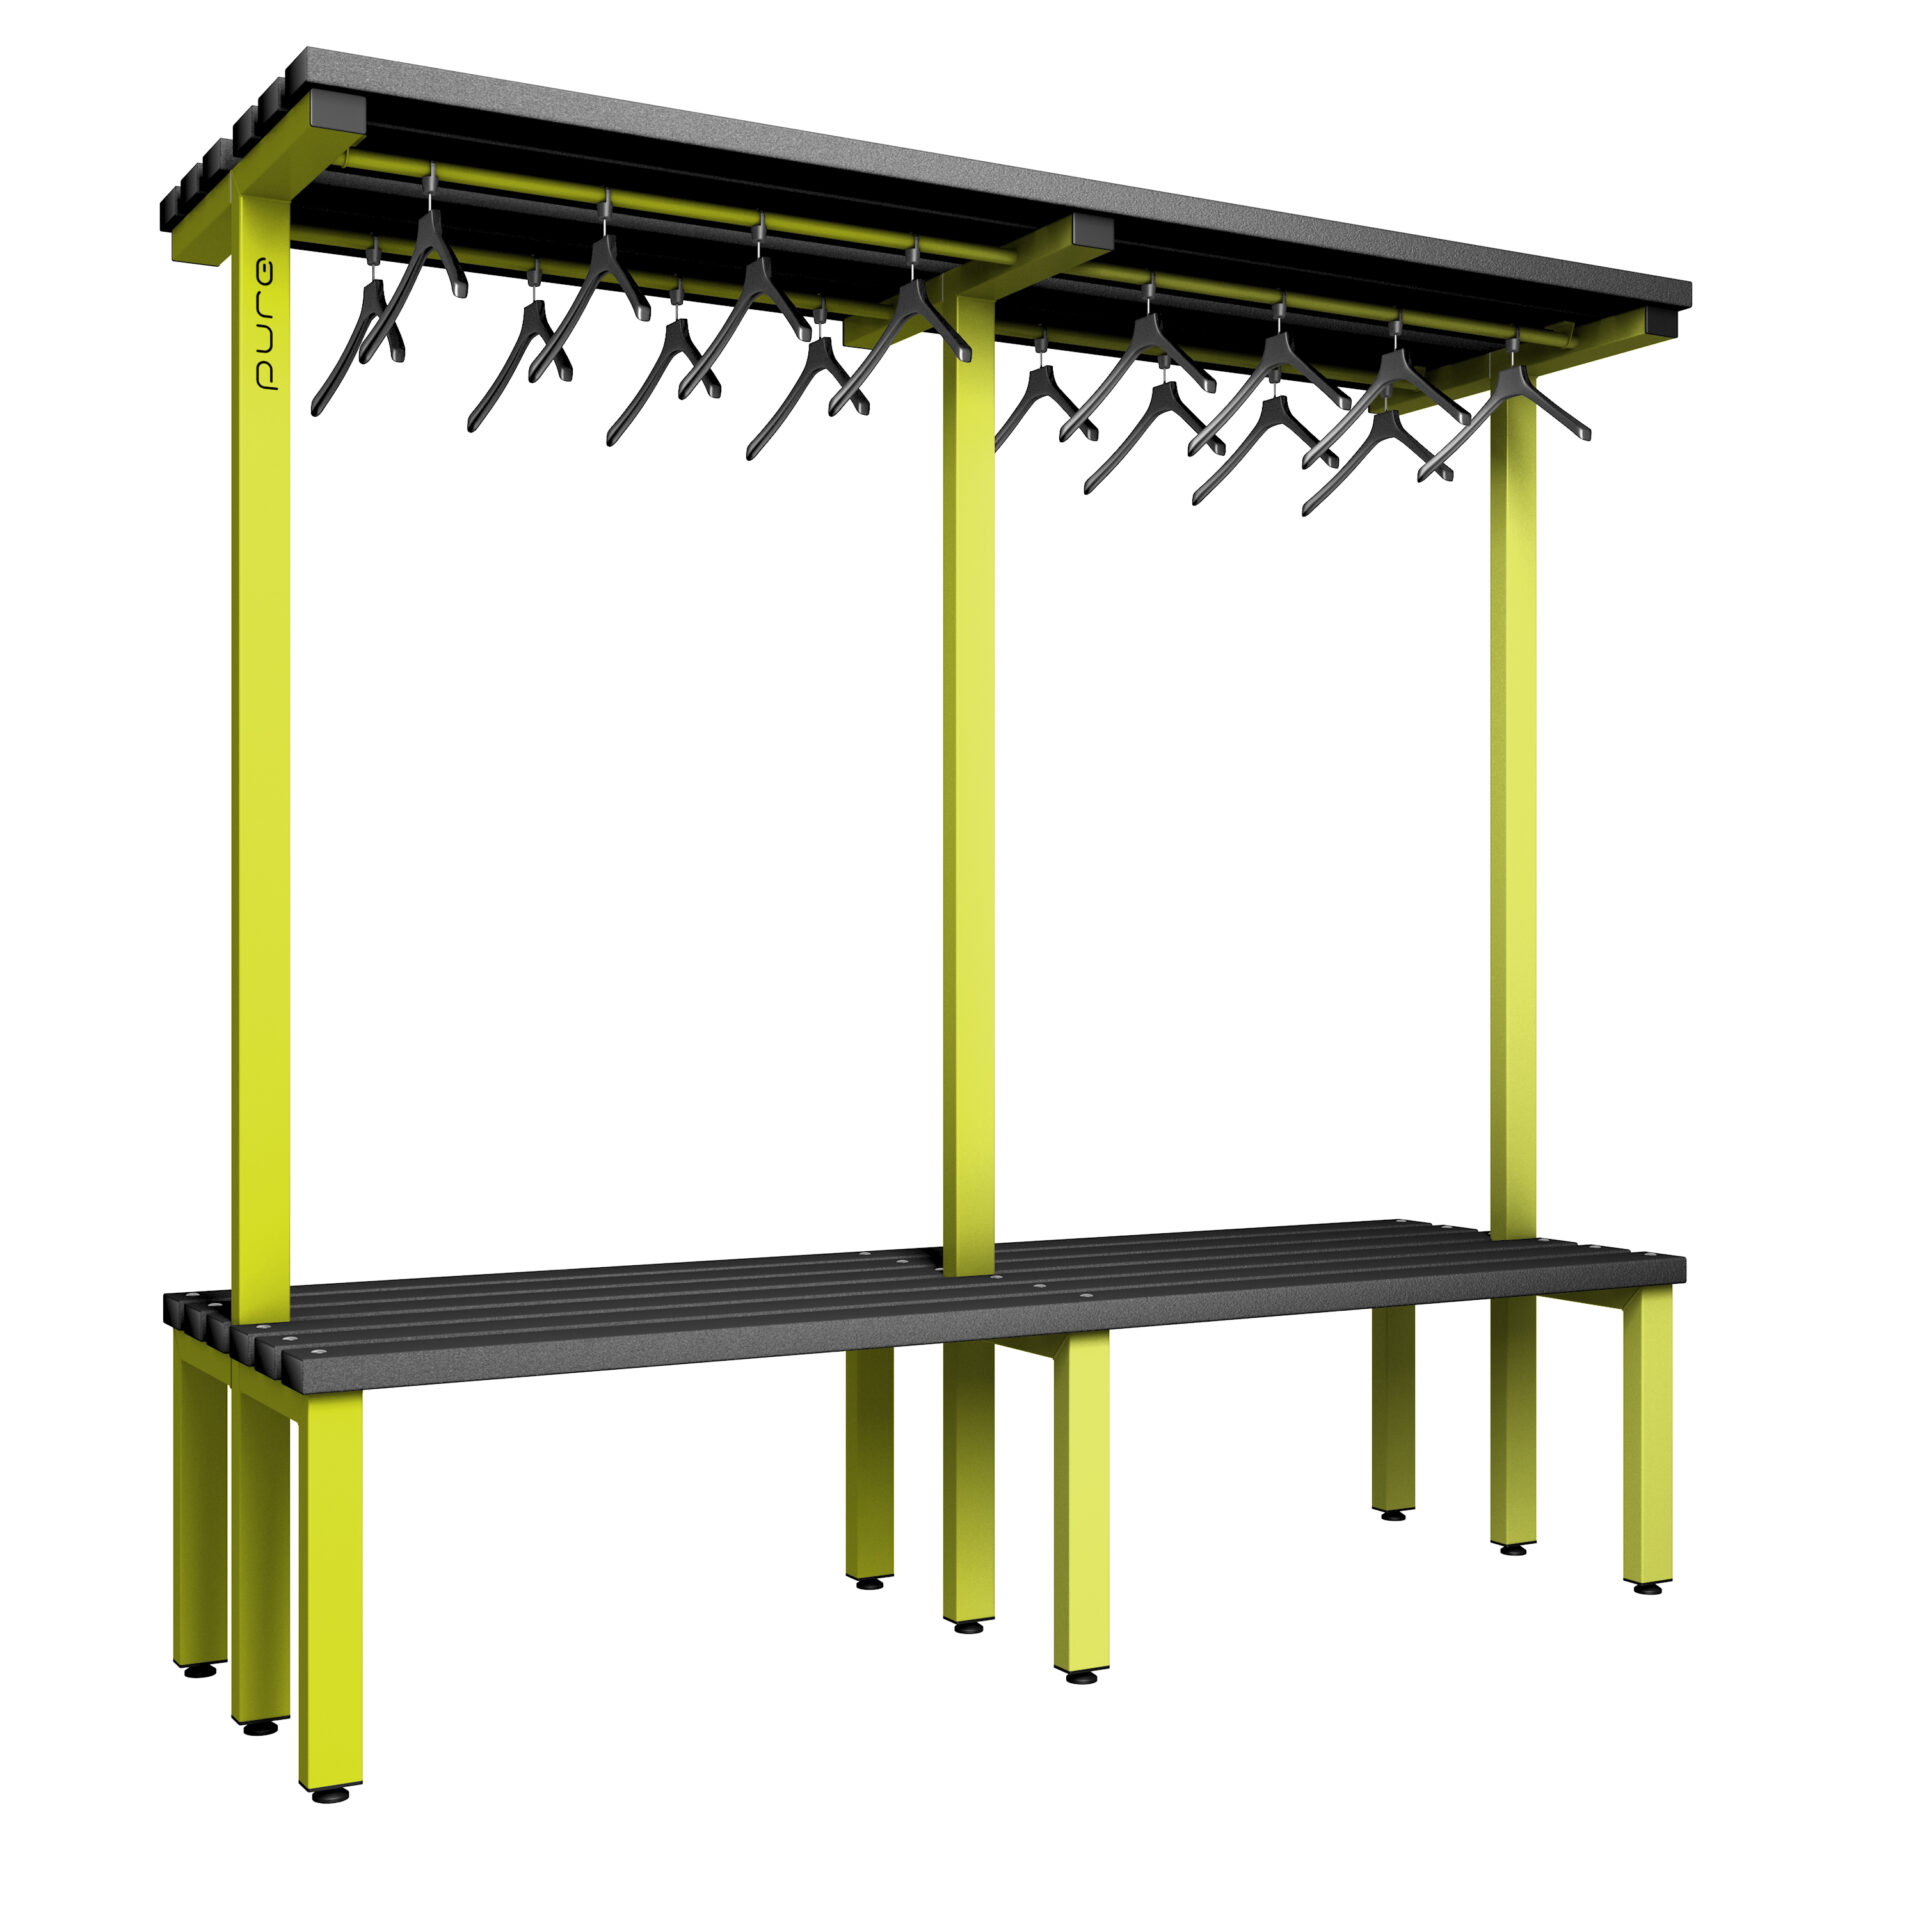 Pure Carbon Zero Double Sided 2000mm Overhead Hanging Bench